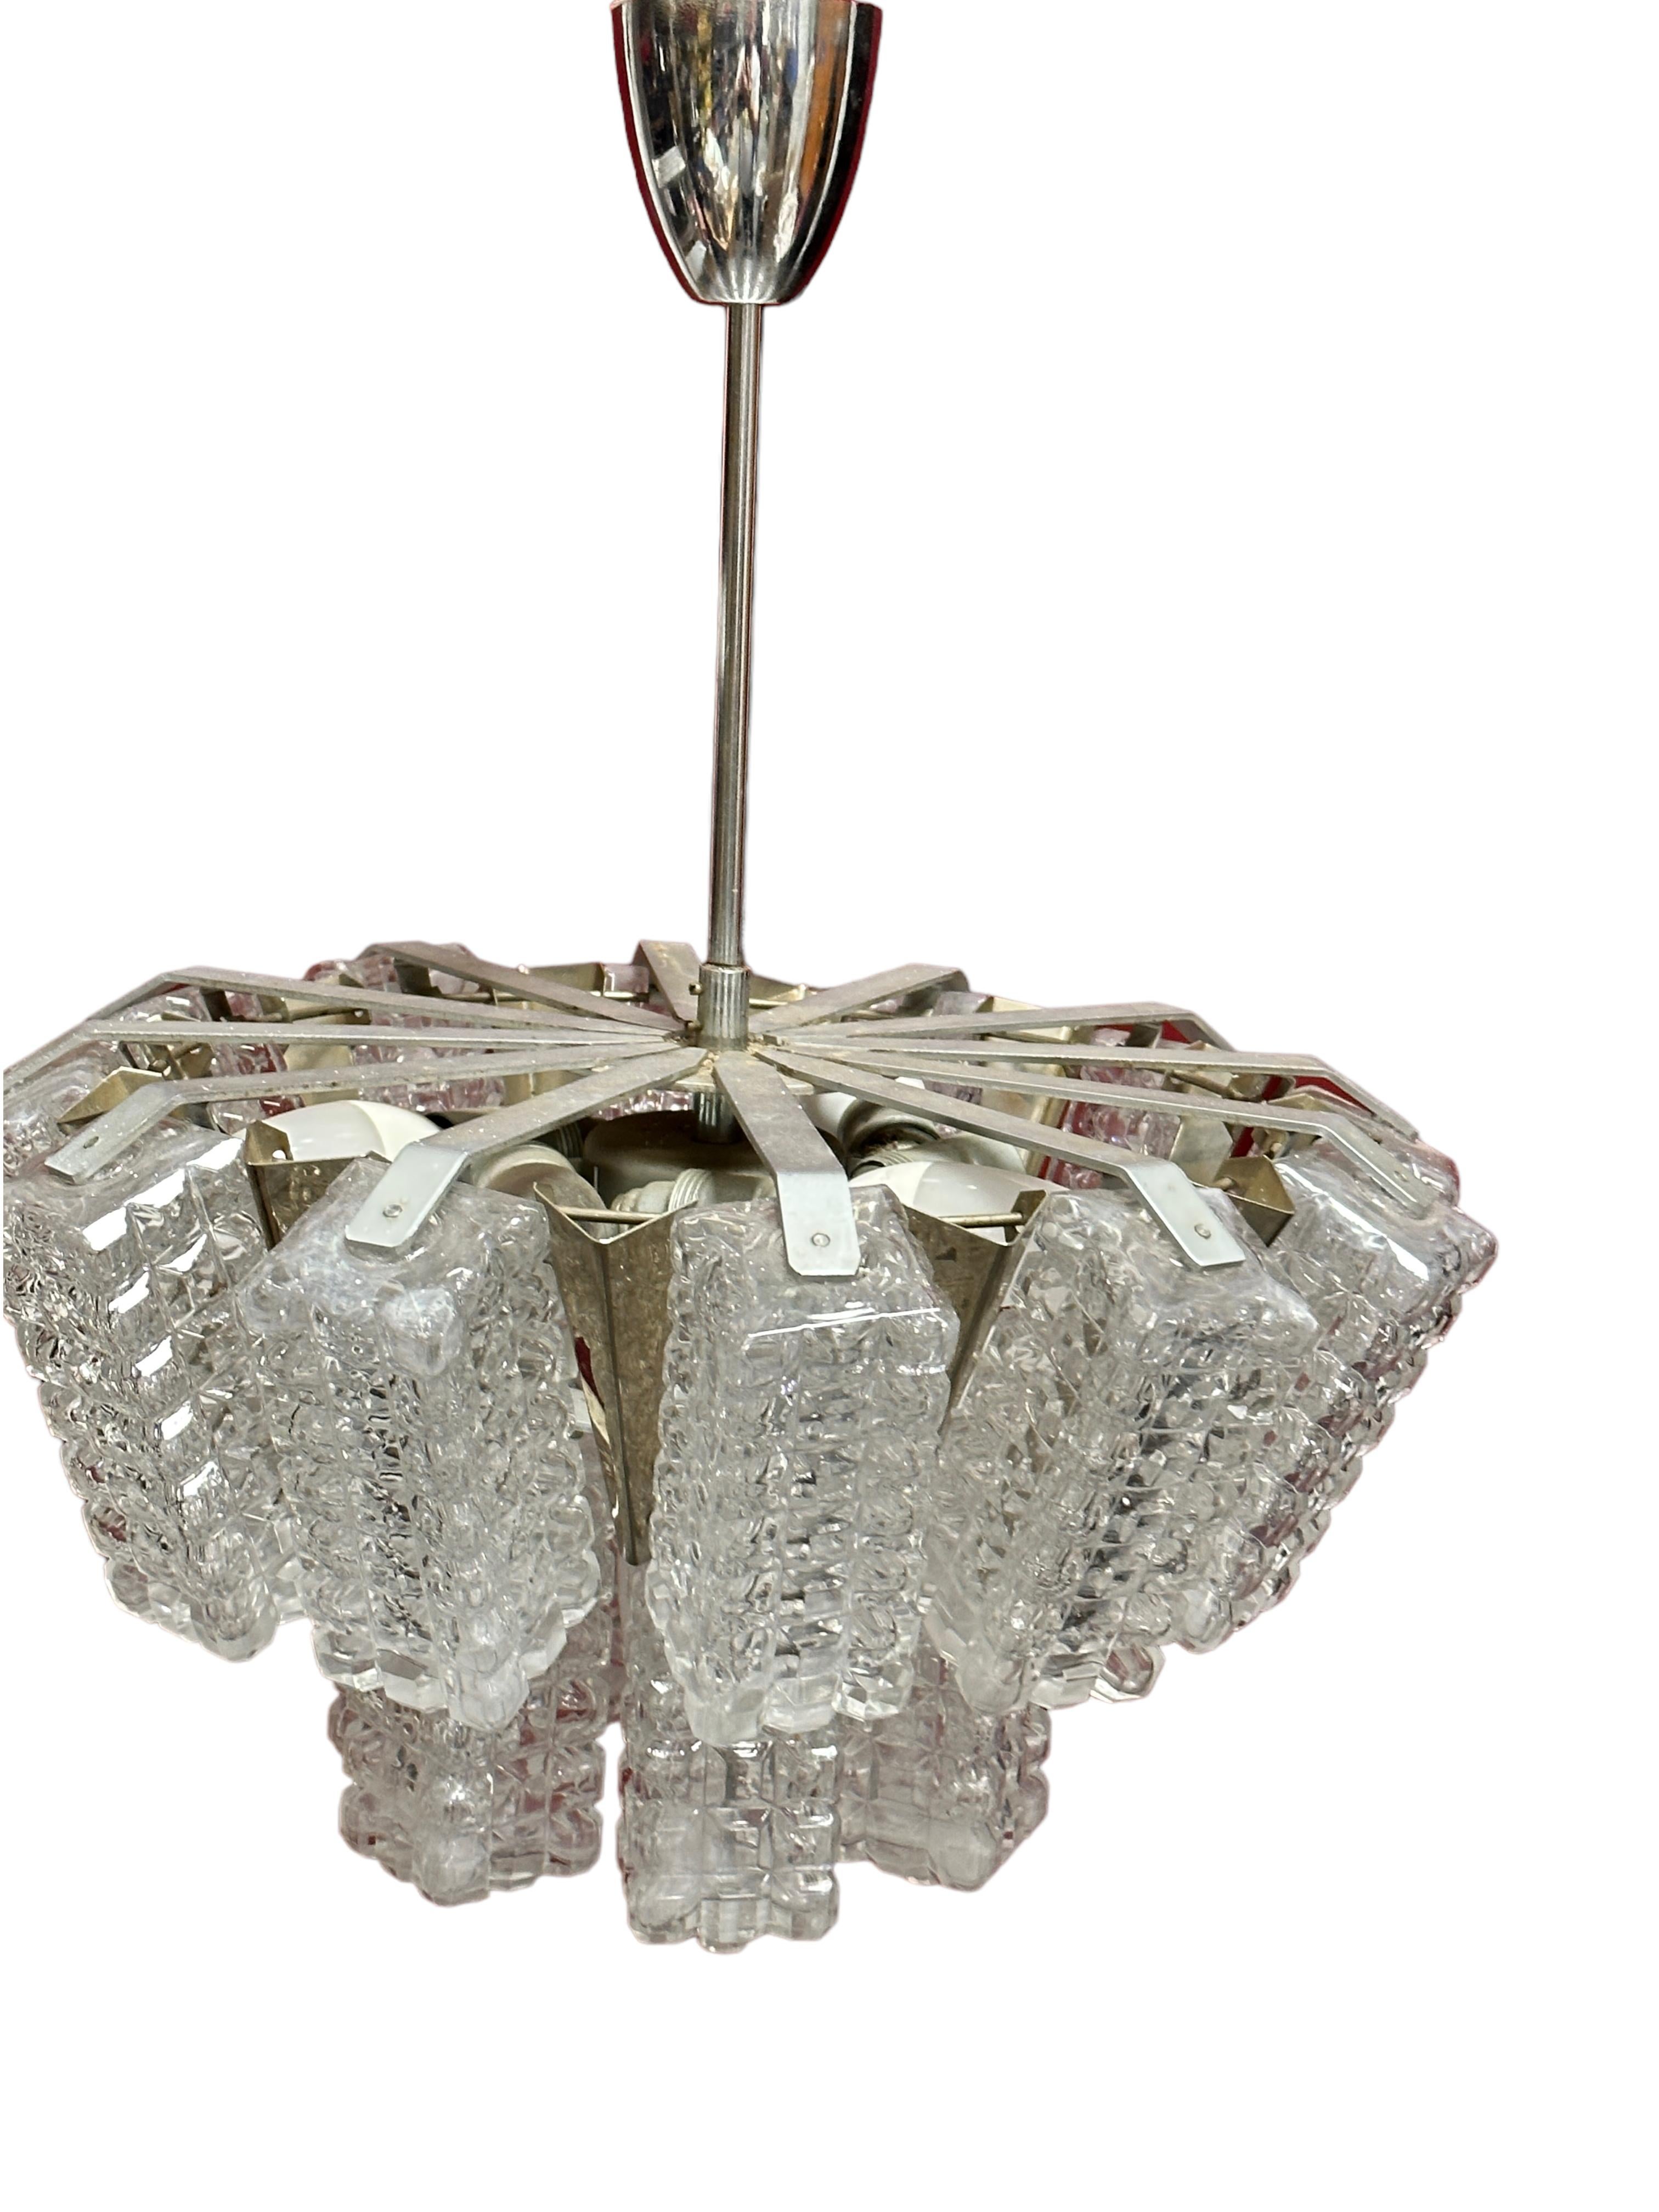 Pair of Two Tiered Glass Cube Chandelier by Austrolux, Austria, 1960s For Sale 9